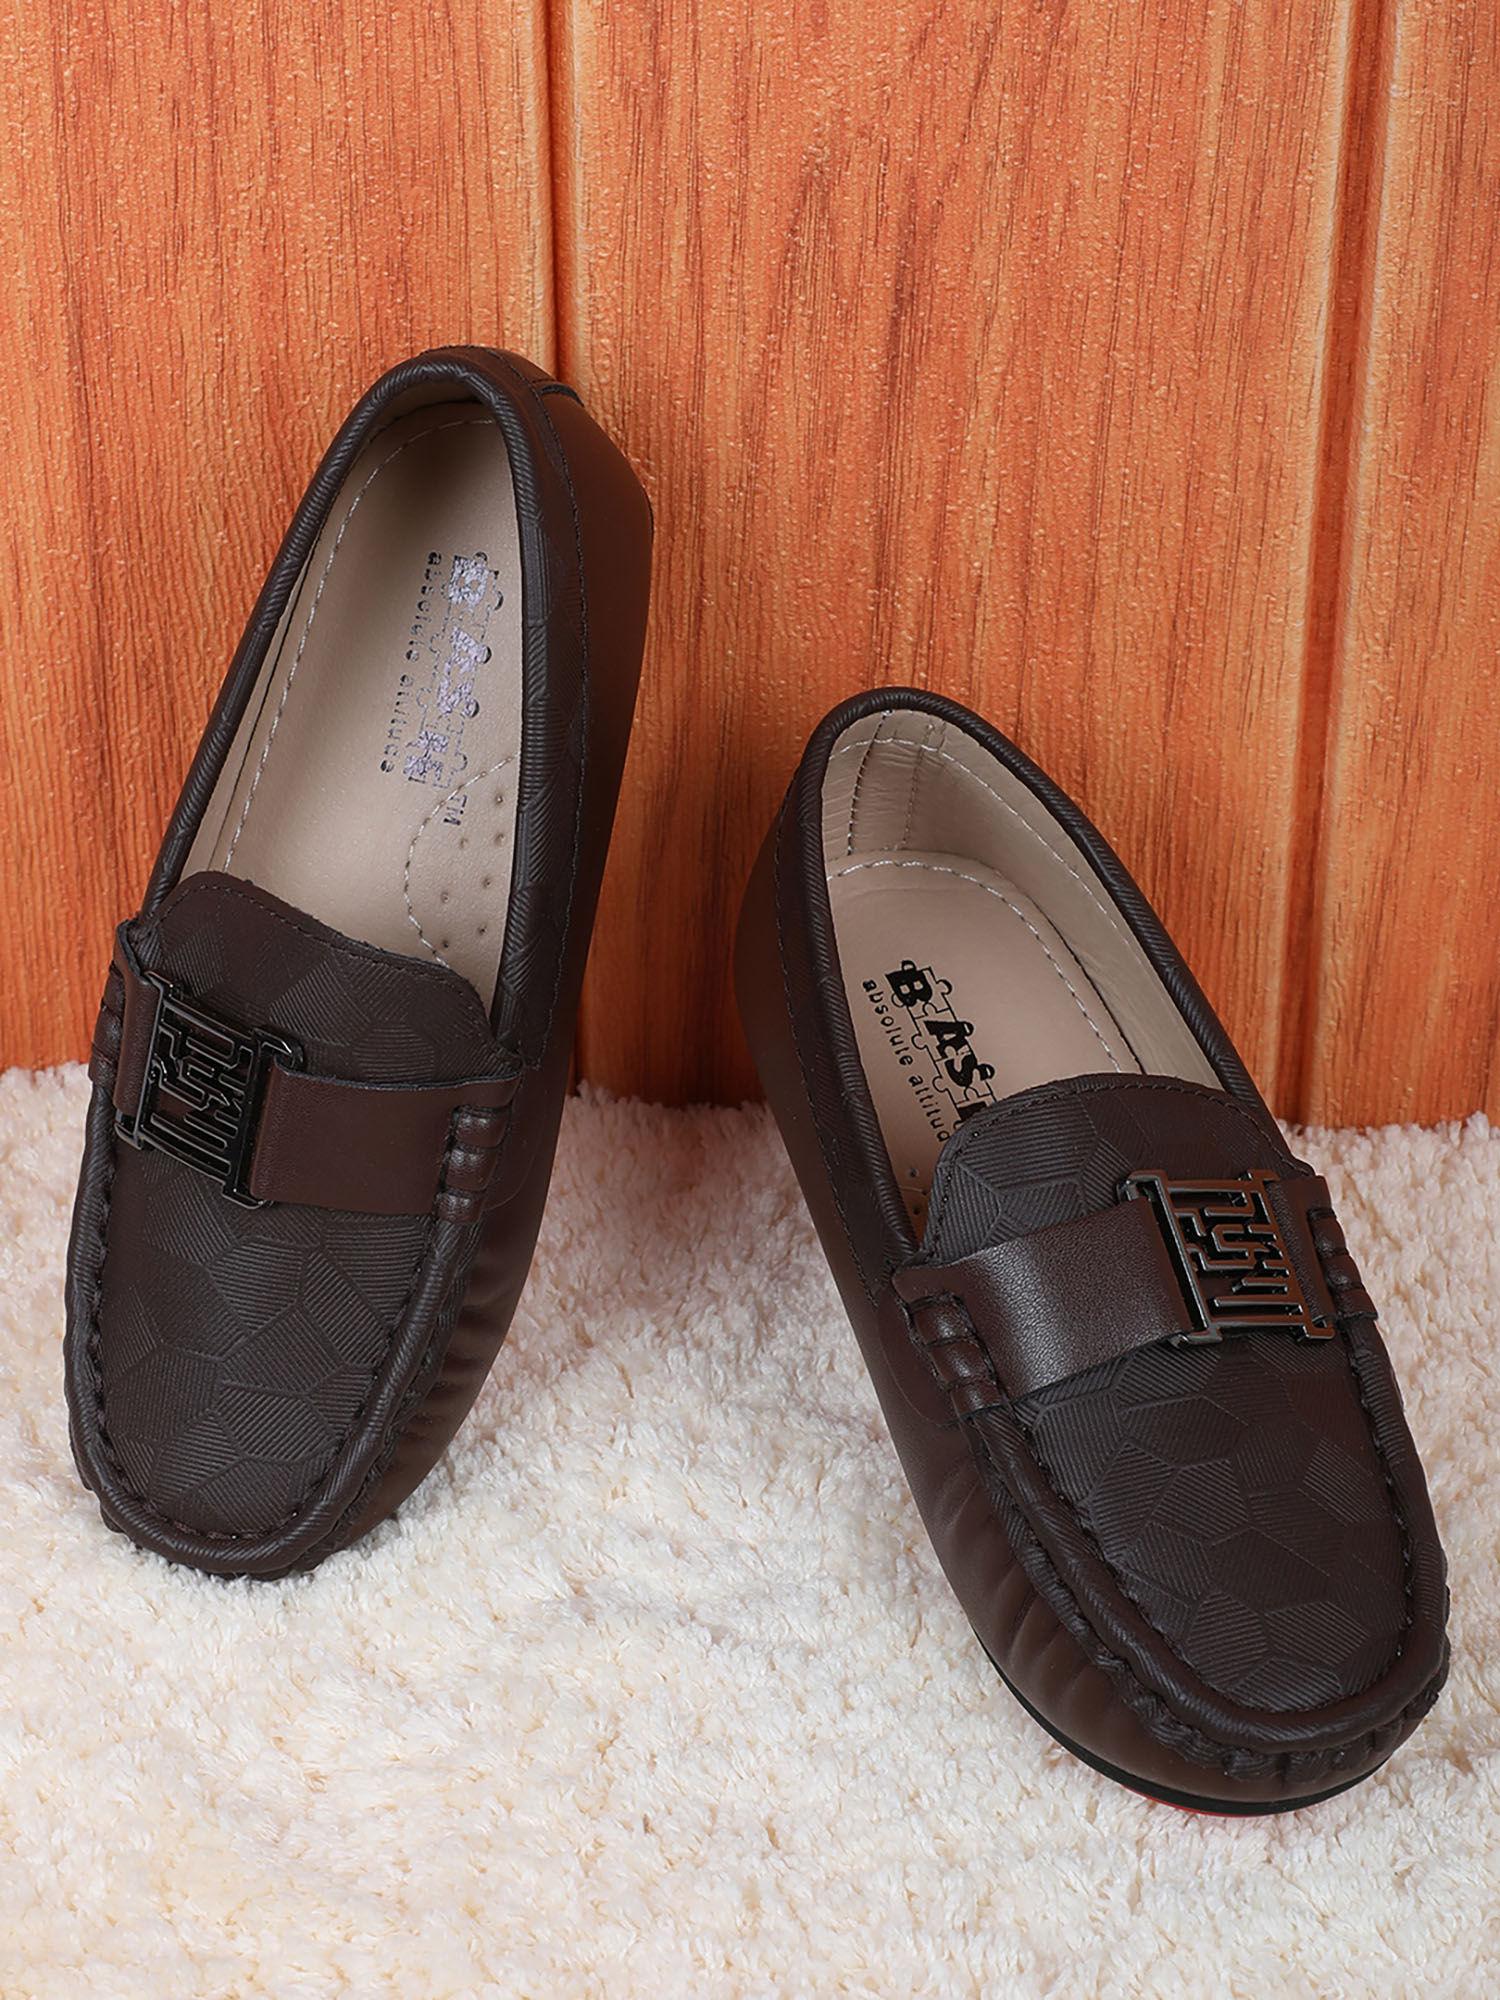 bash-kids-textured-leatherite-loafer-shoes-brown